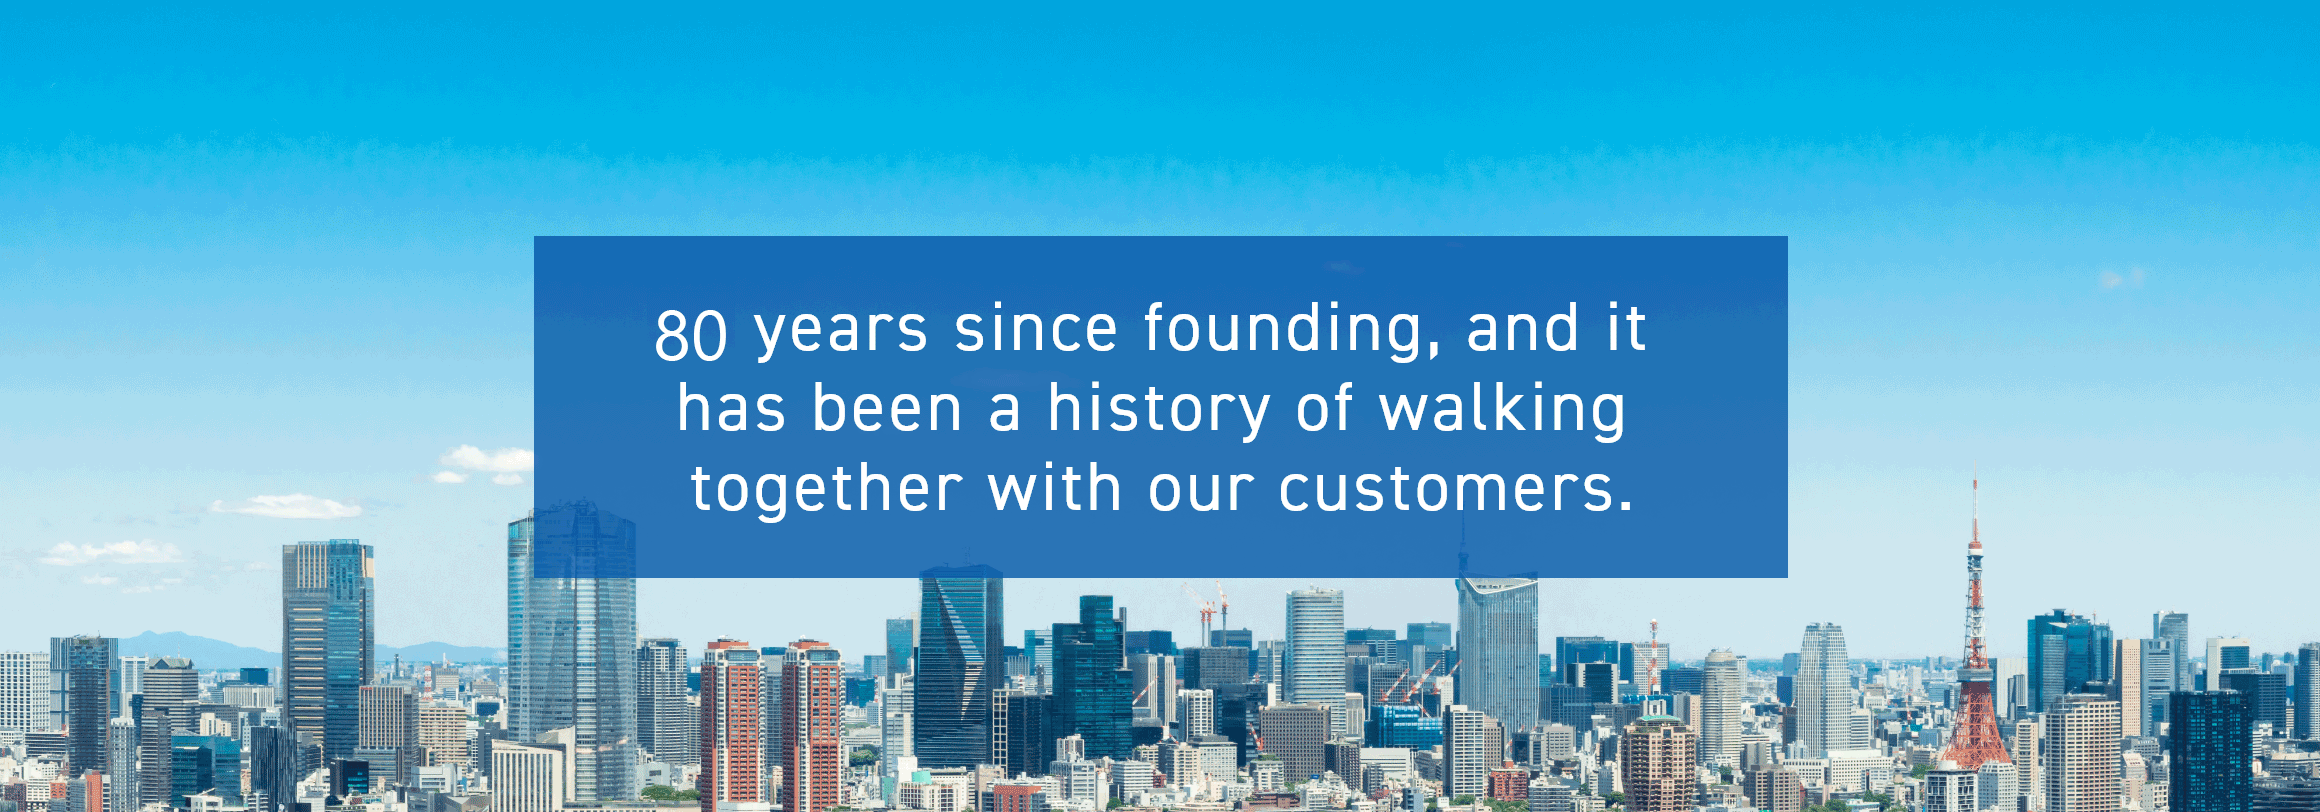 80 years since founding, and it has been a history of walking together with our customers.